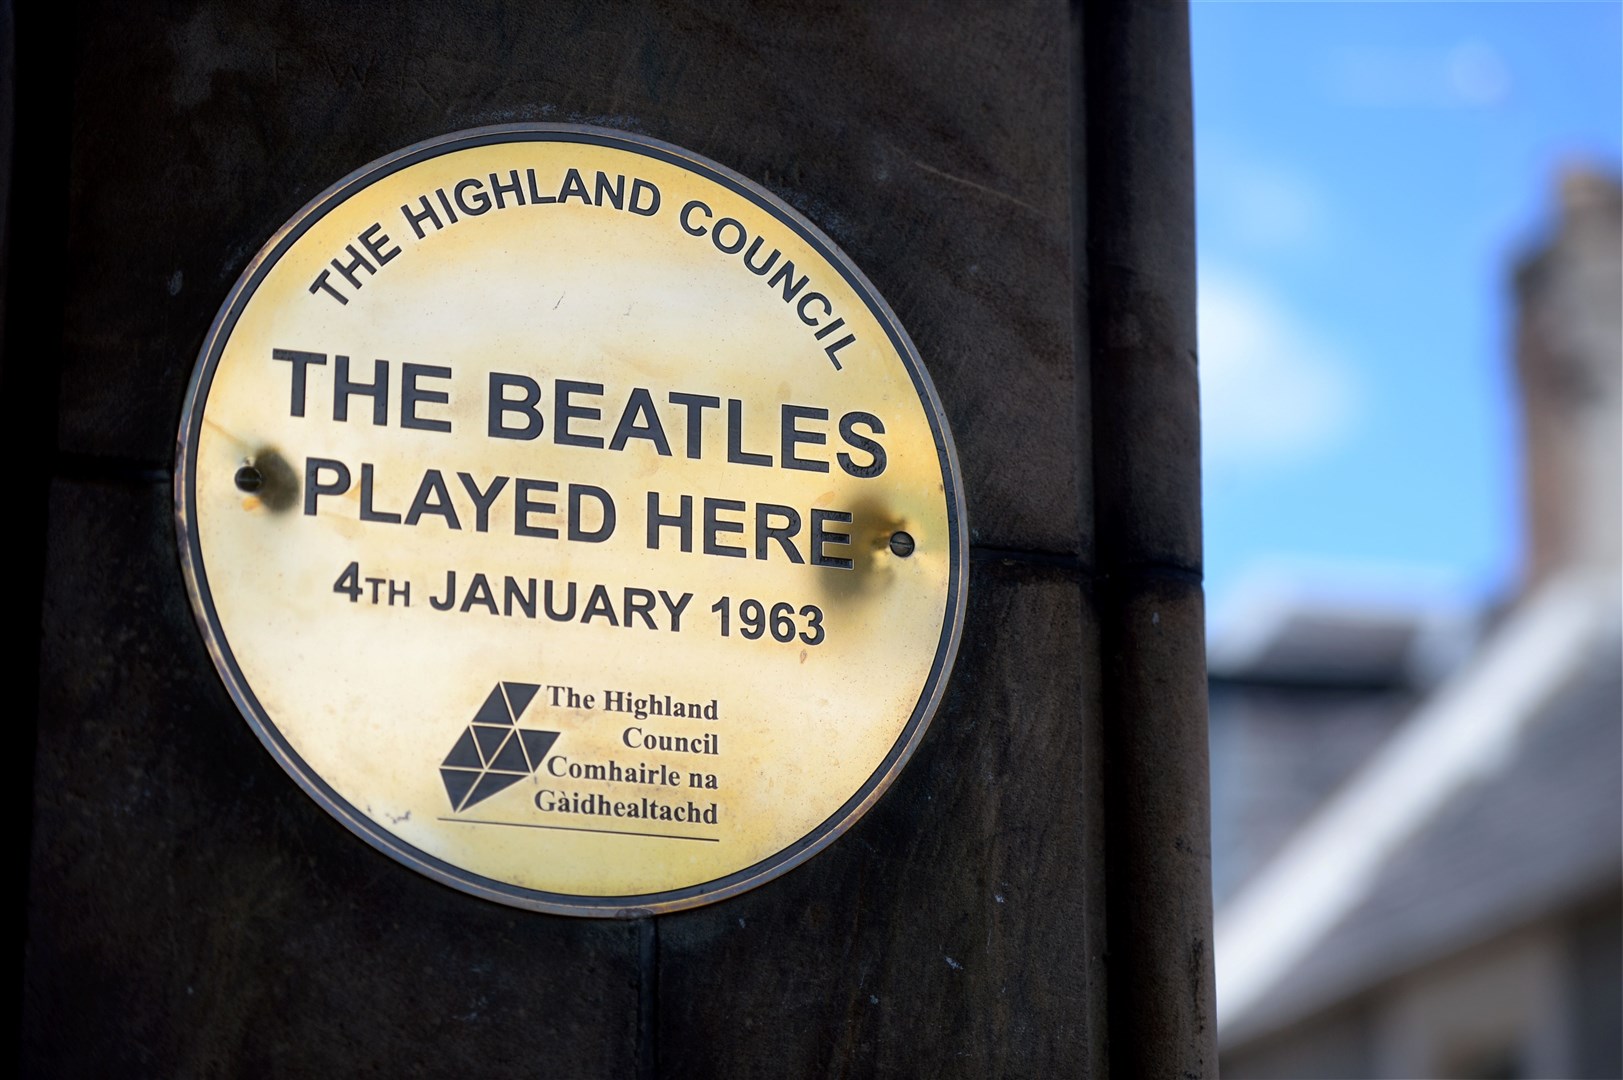 The Beatles played here plaque at Dingwall Town Hall.